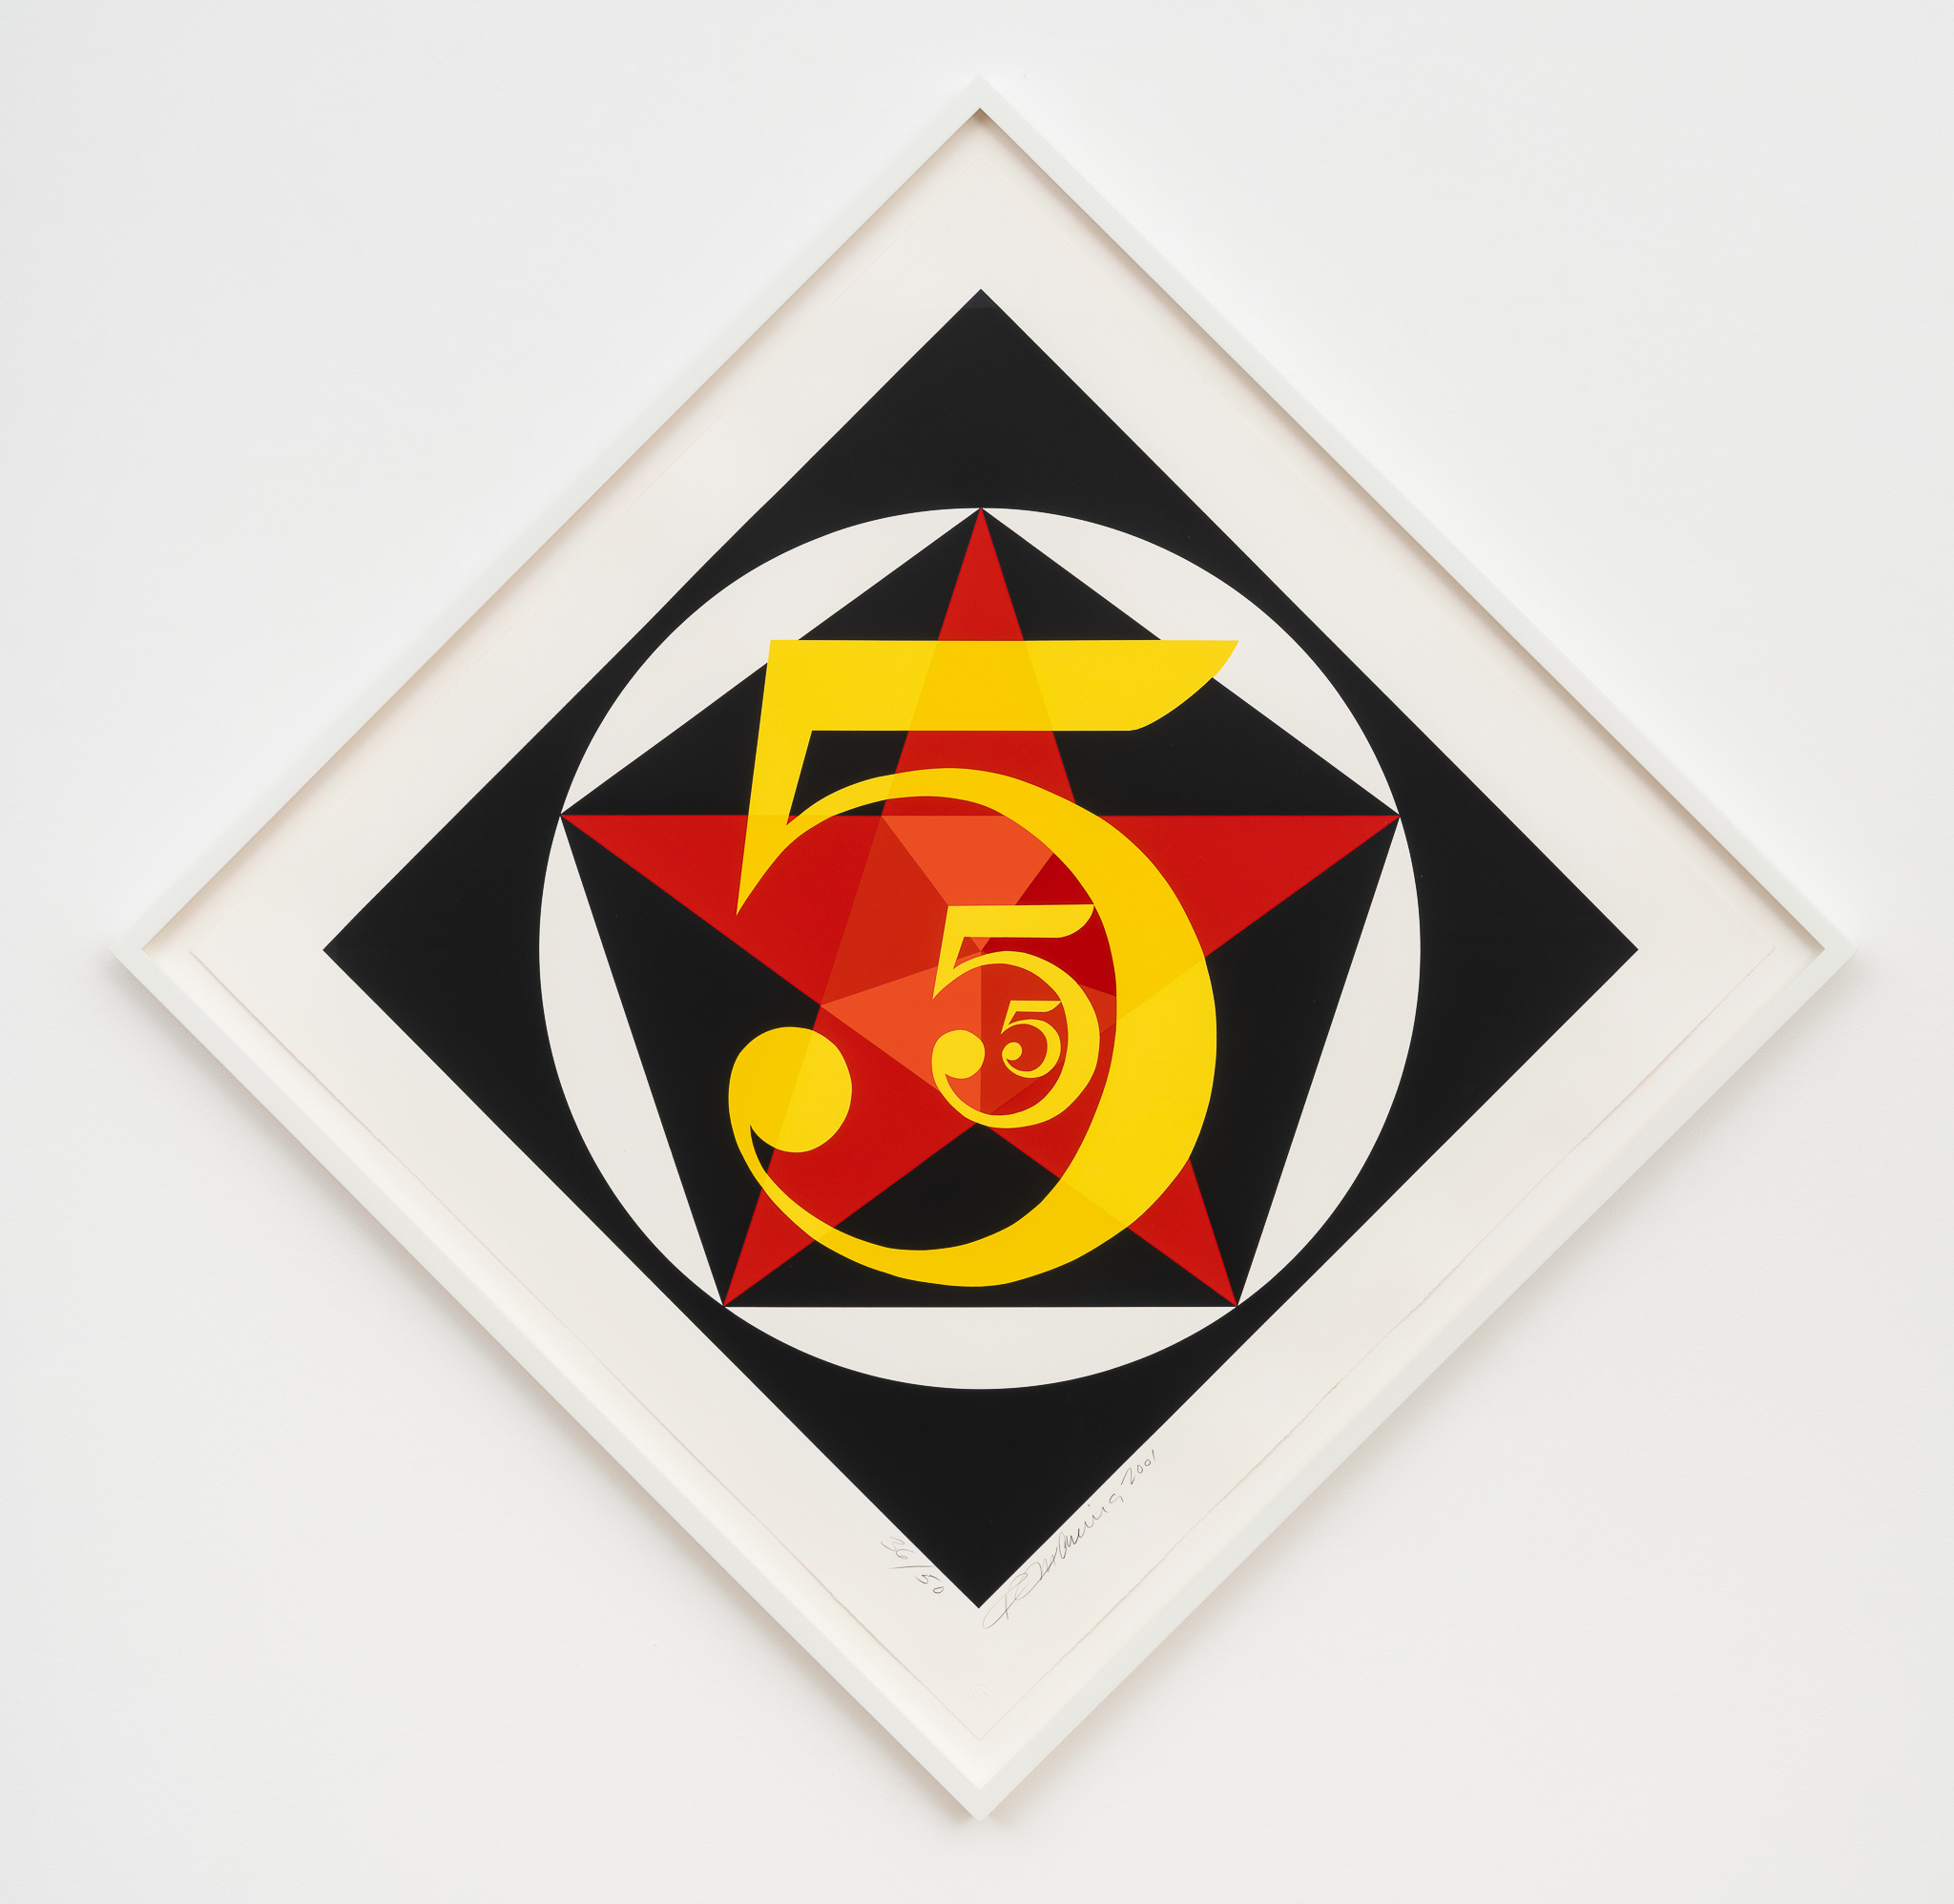 A black diamond shaped pop art image with repeating yellow 5s over a red star